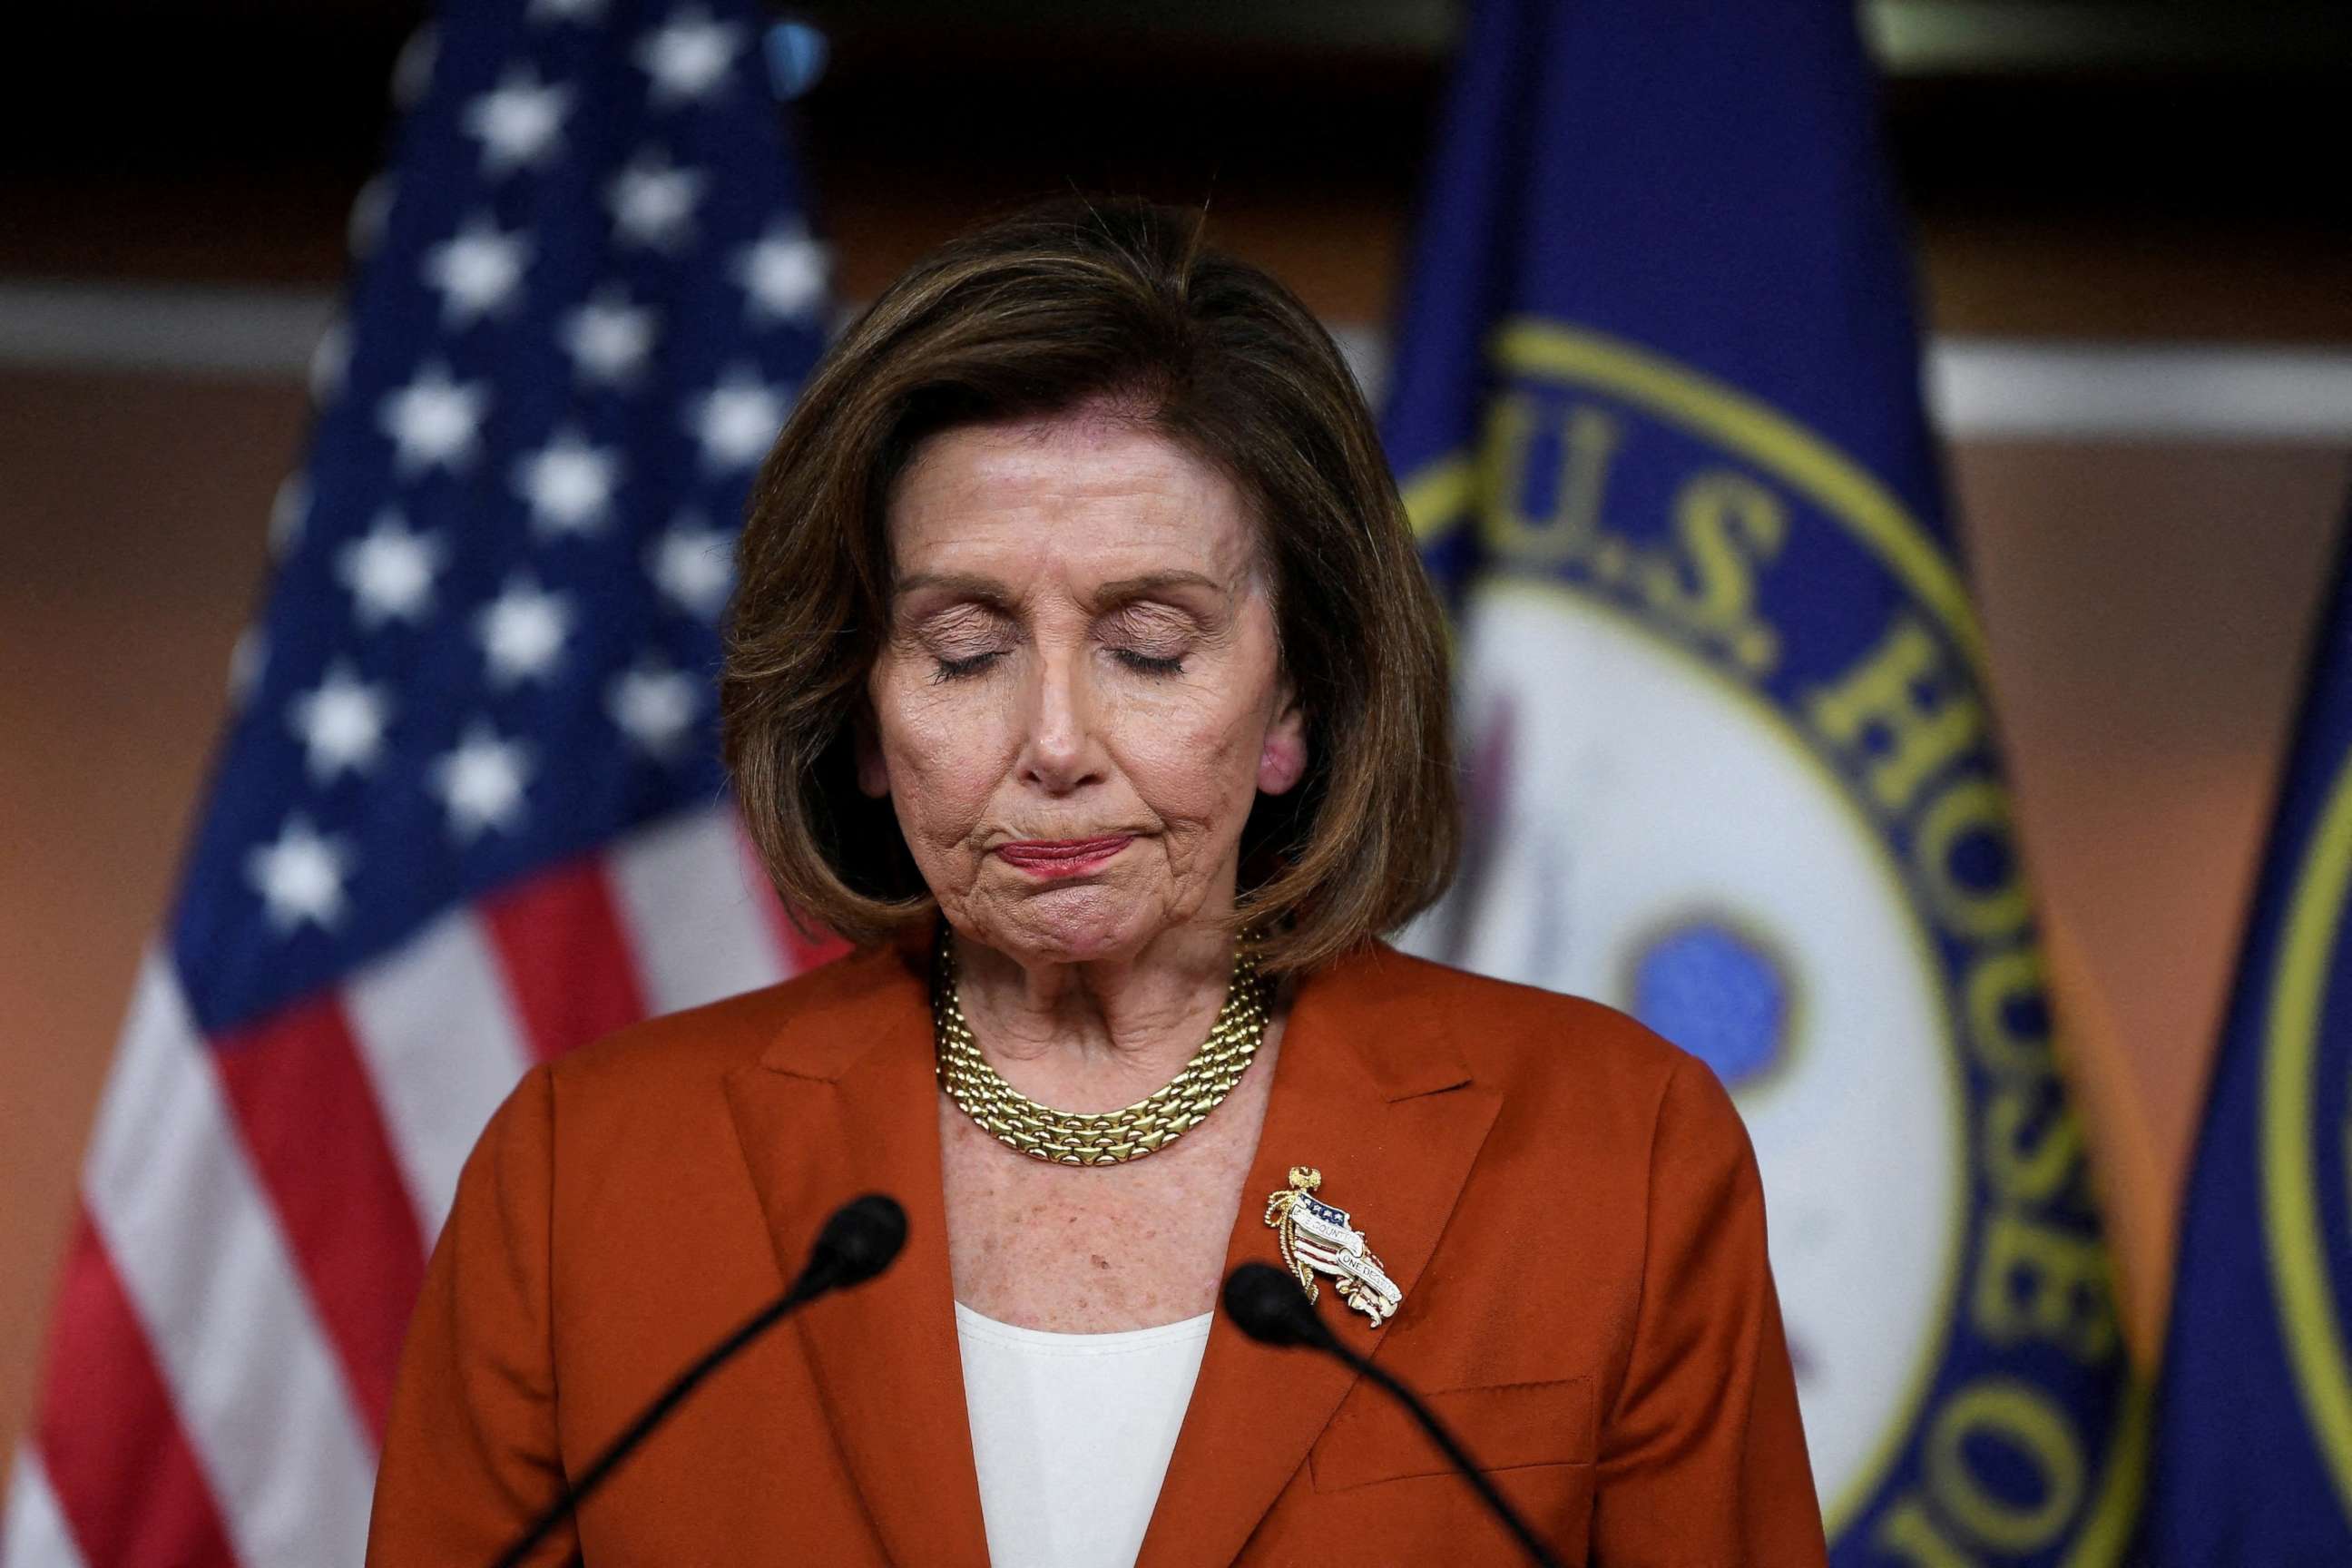 PHOTO: House Speaker Nancy Pelosi reacts to the overturning of Roe v Wade during her weekly news conference on Capitol Hill in Washington, June 24, 2022.